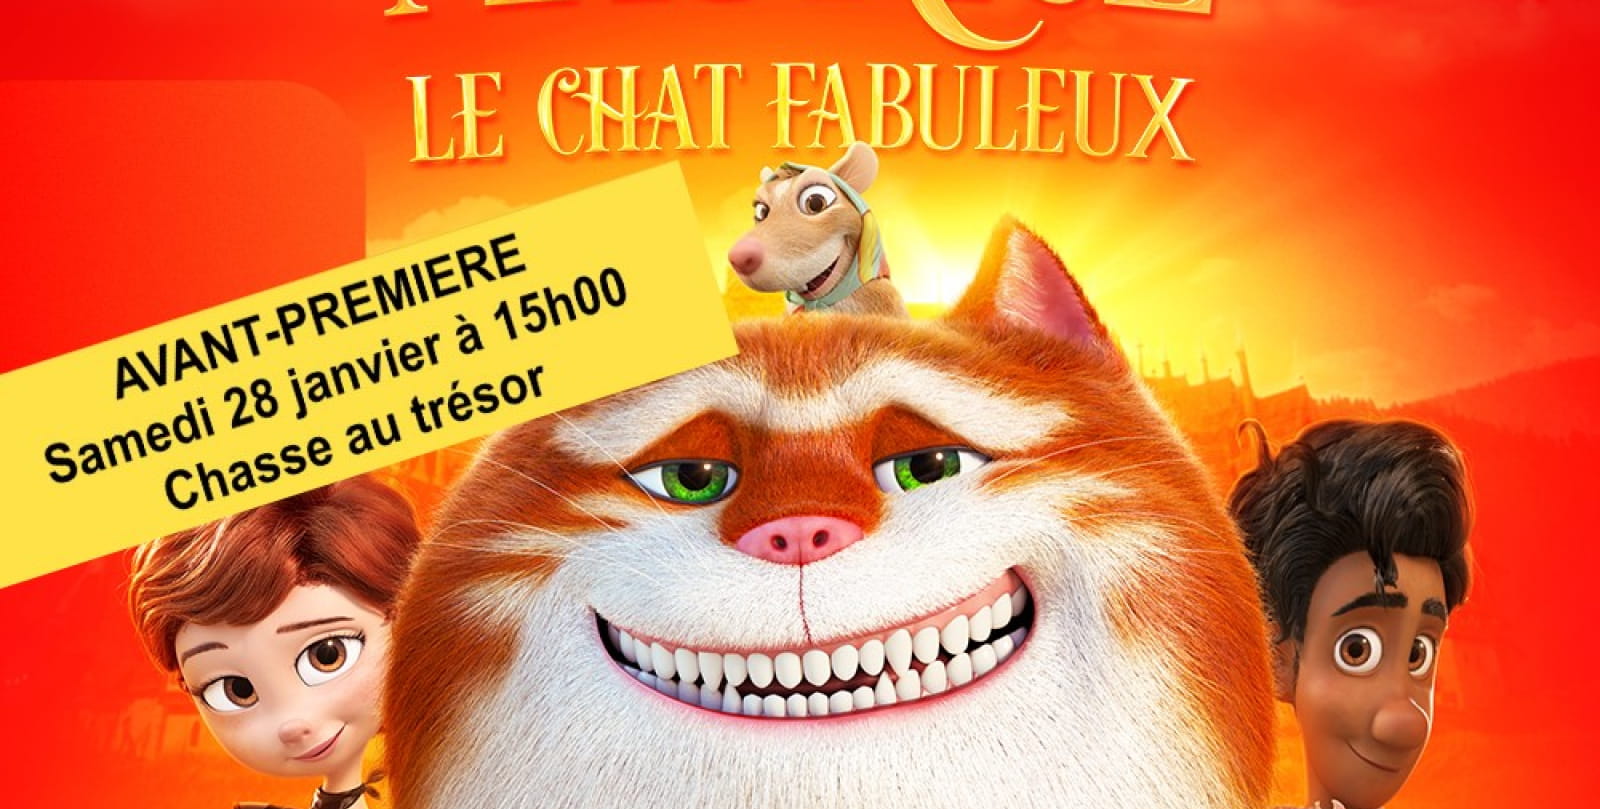 MAURICE LE CHAT FABULEUX